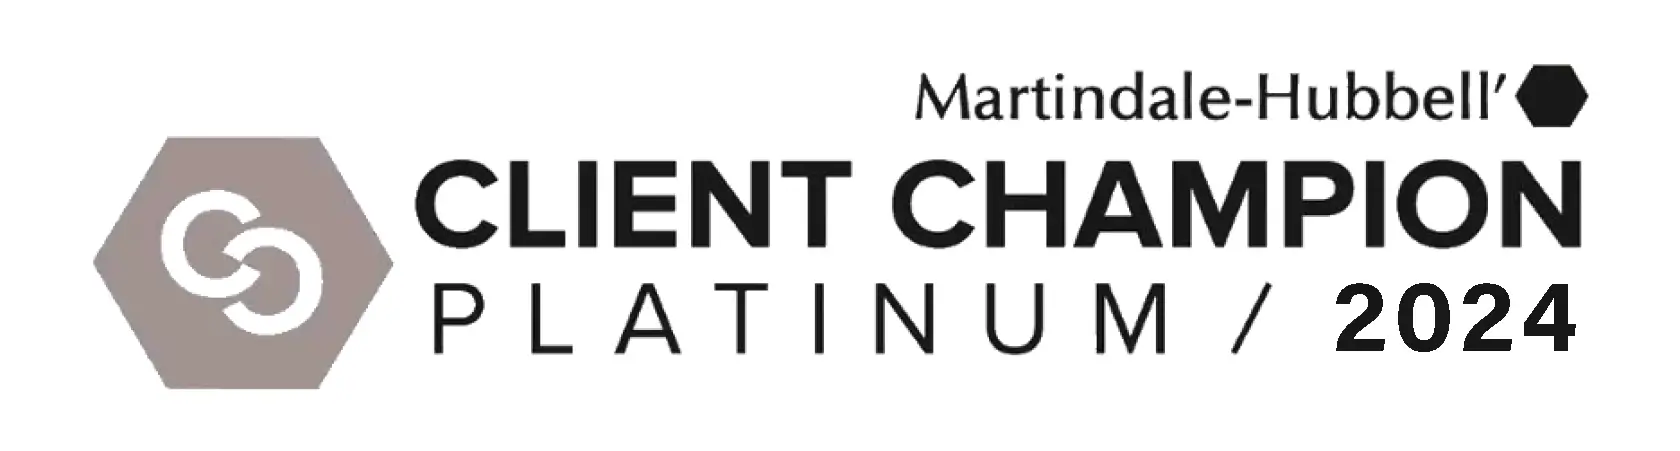 Martindale Hubbell Client Champion Platinum 2024 Award